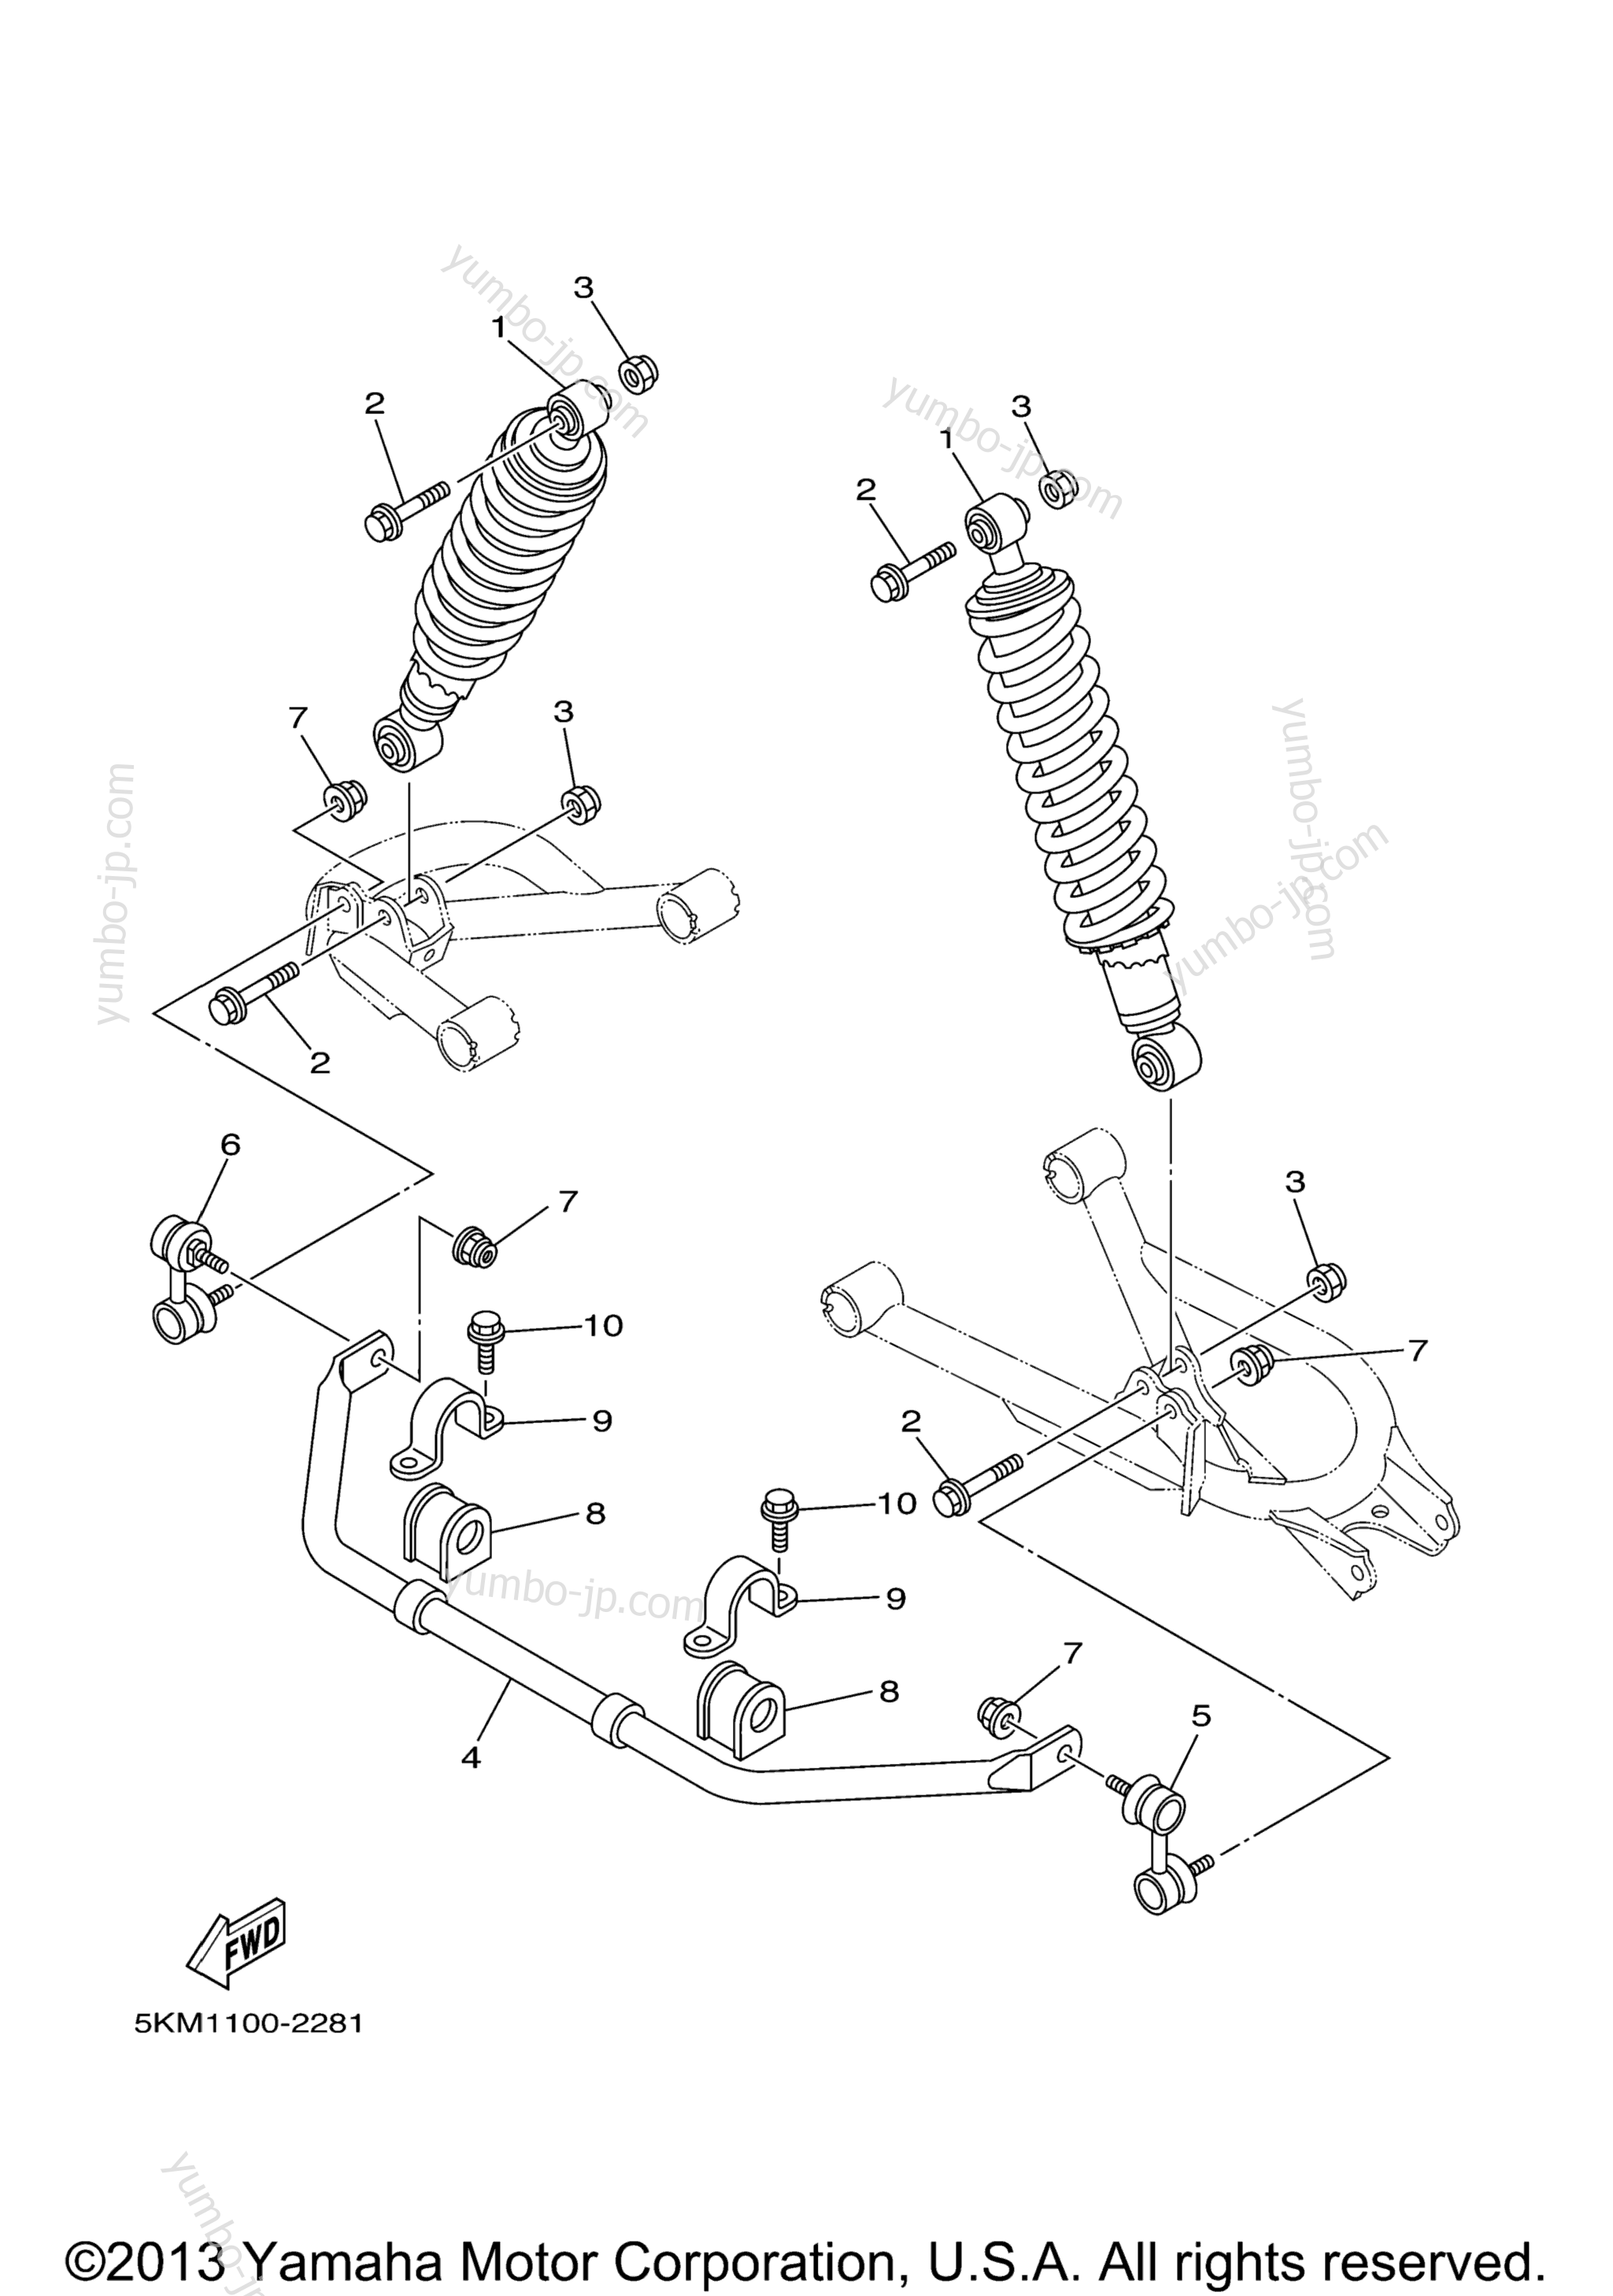 Rear Suspension for ATVs YAMAHA GRIZZLY 660 HUNTER (YFM66FGHX) 2008 year